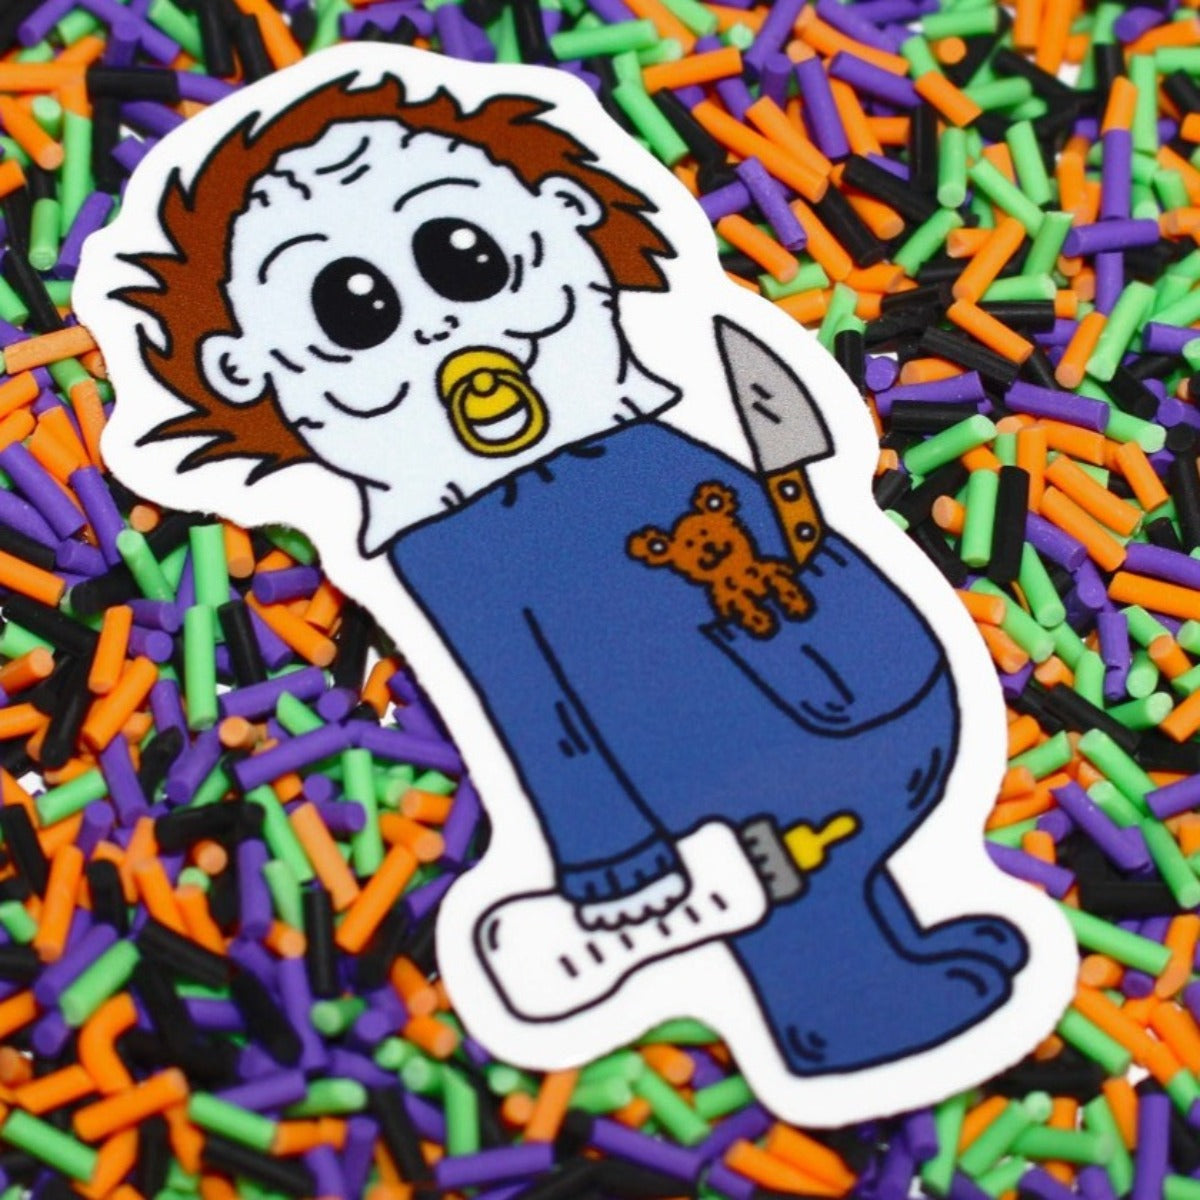 Baby Michael Myers Sticker by SpookyKillerBabies.com Holding his Baby Bottle, Teddy Bear and Knife. 